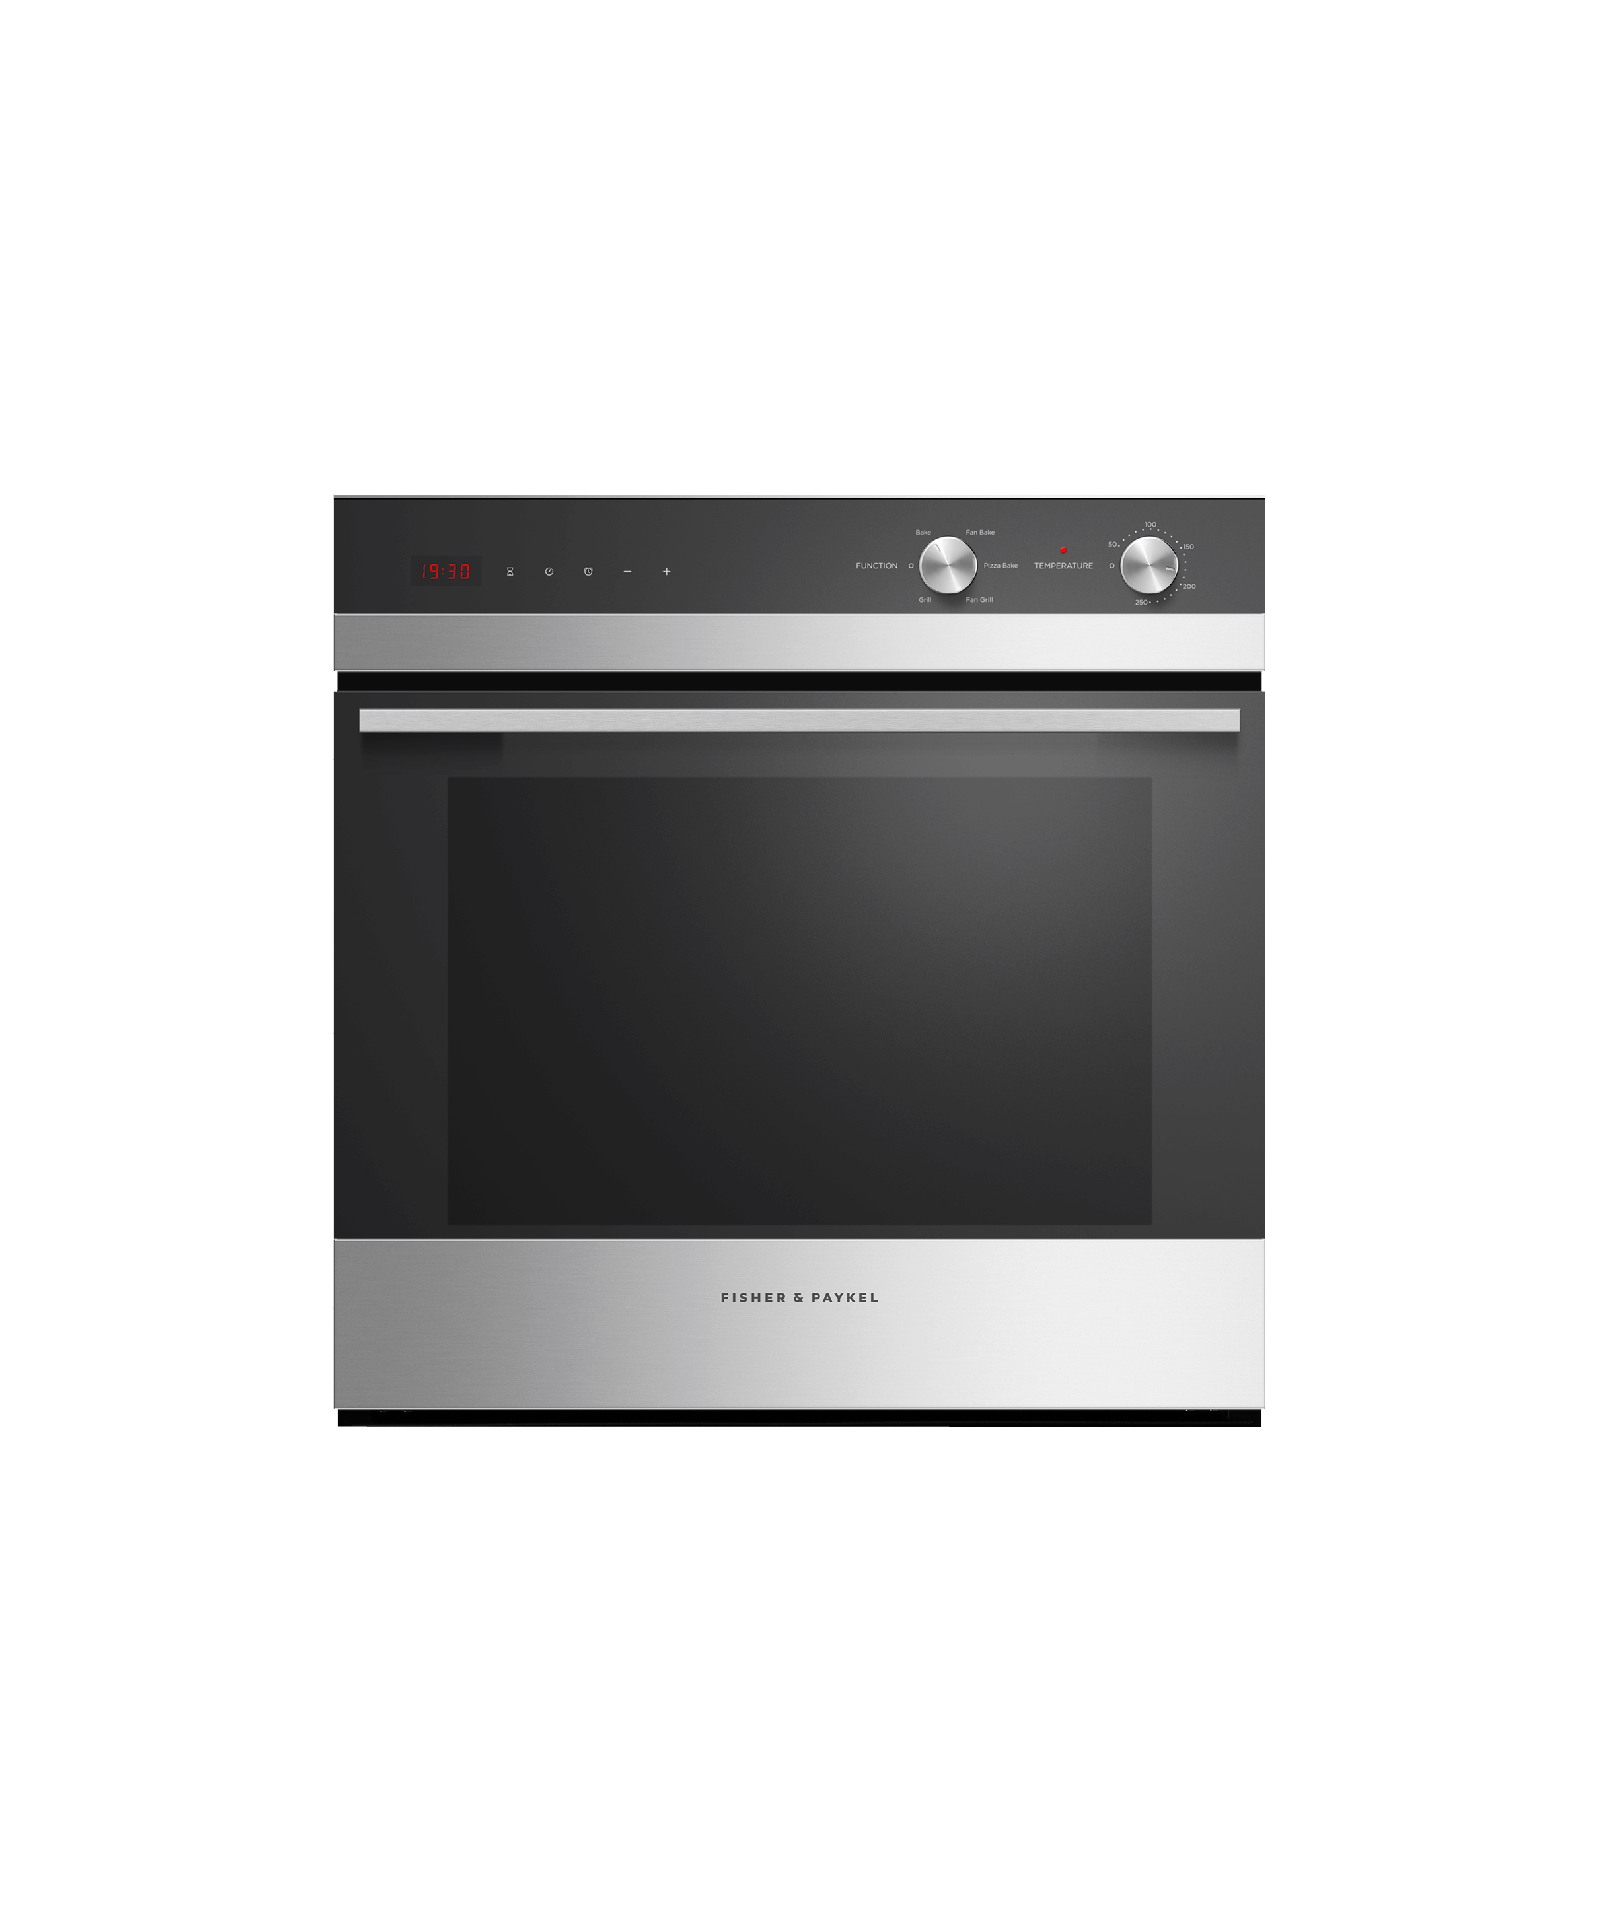 Oven, 60cm, 5 Function